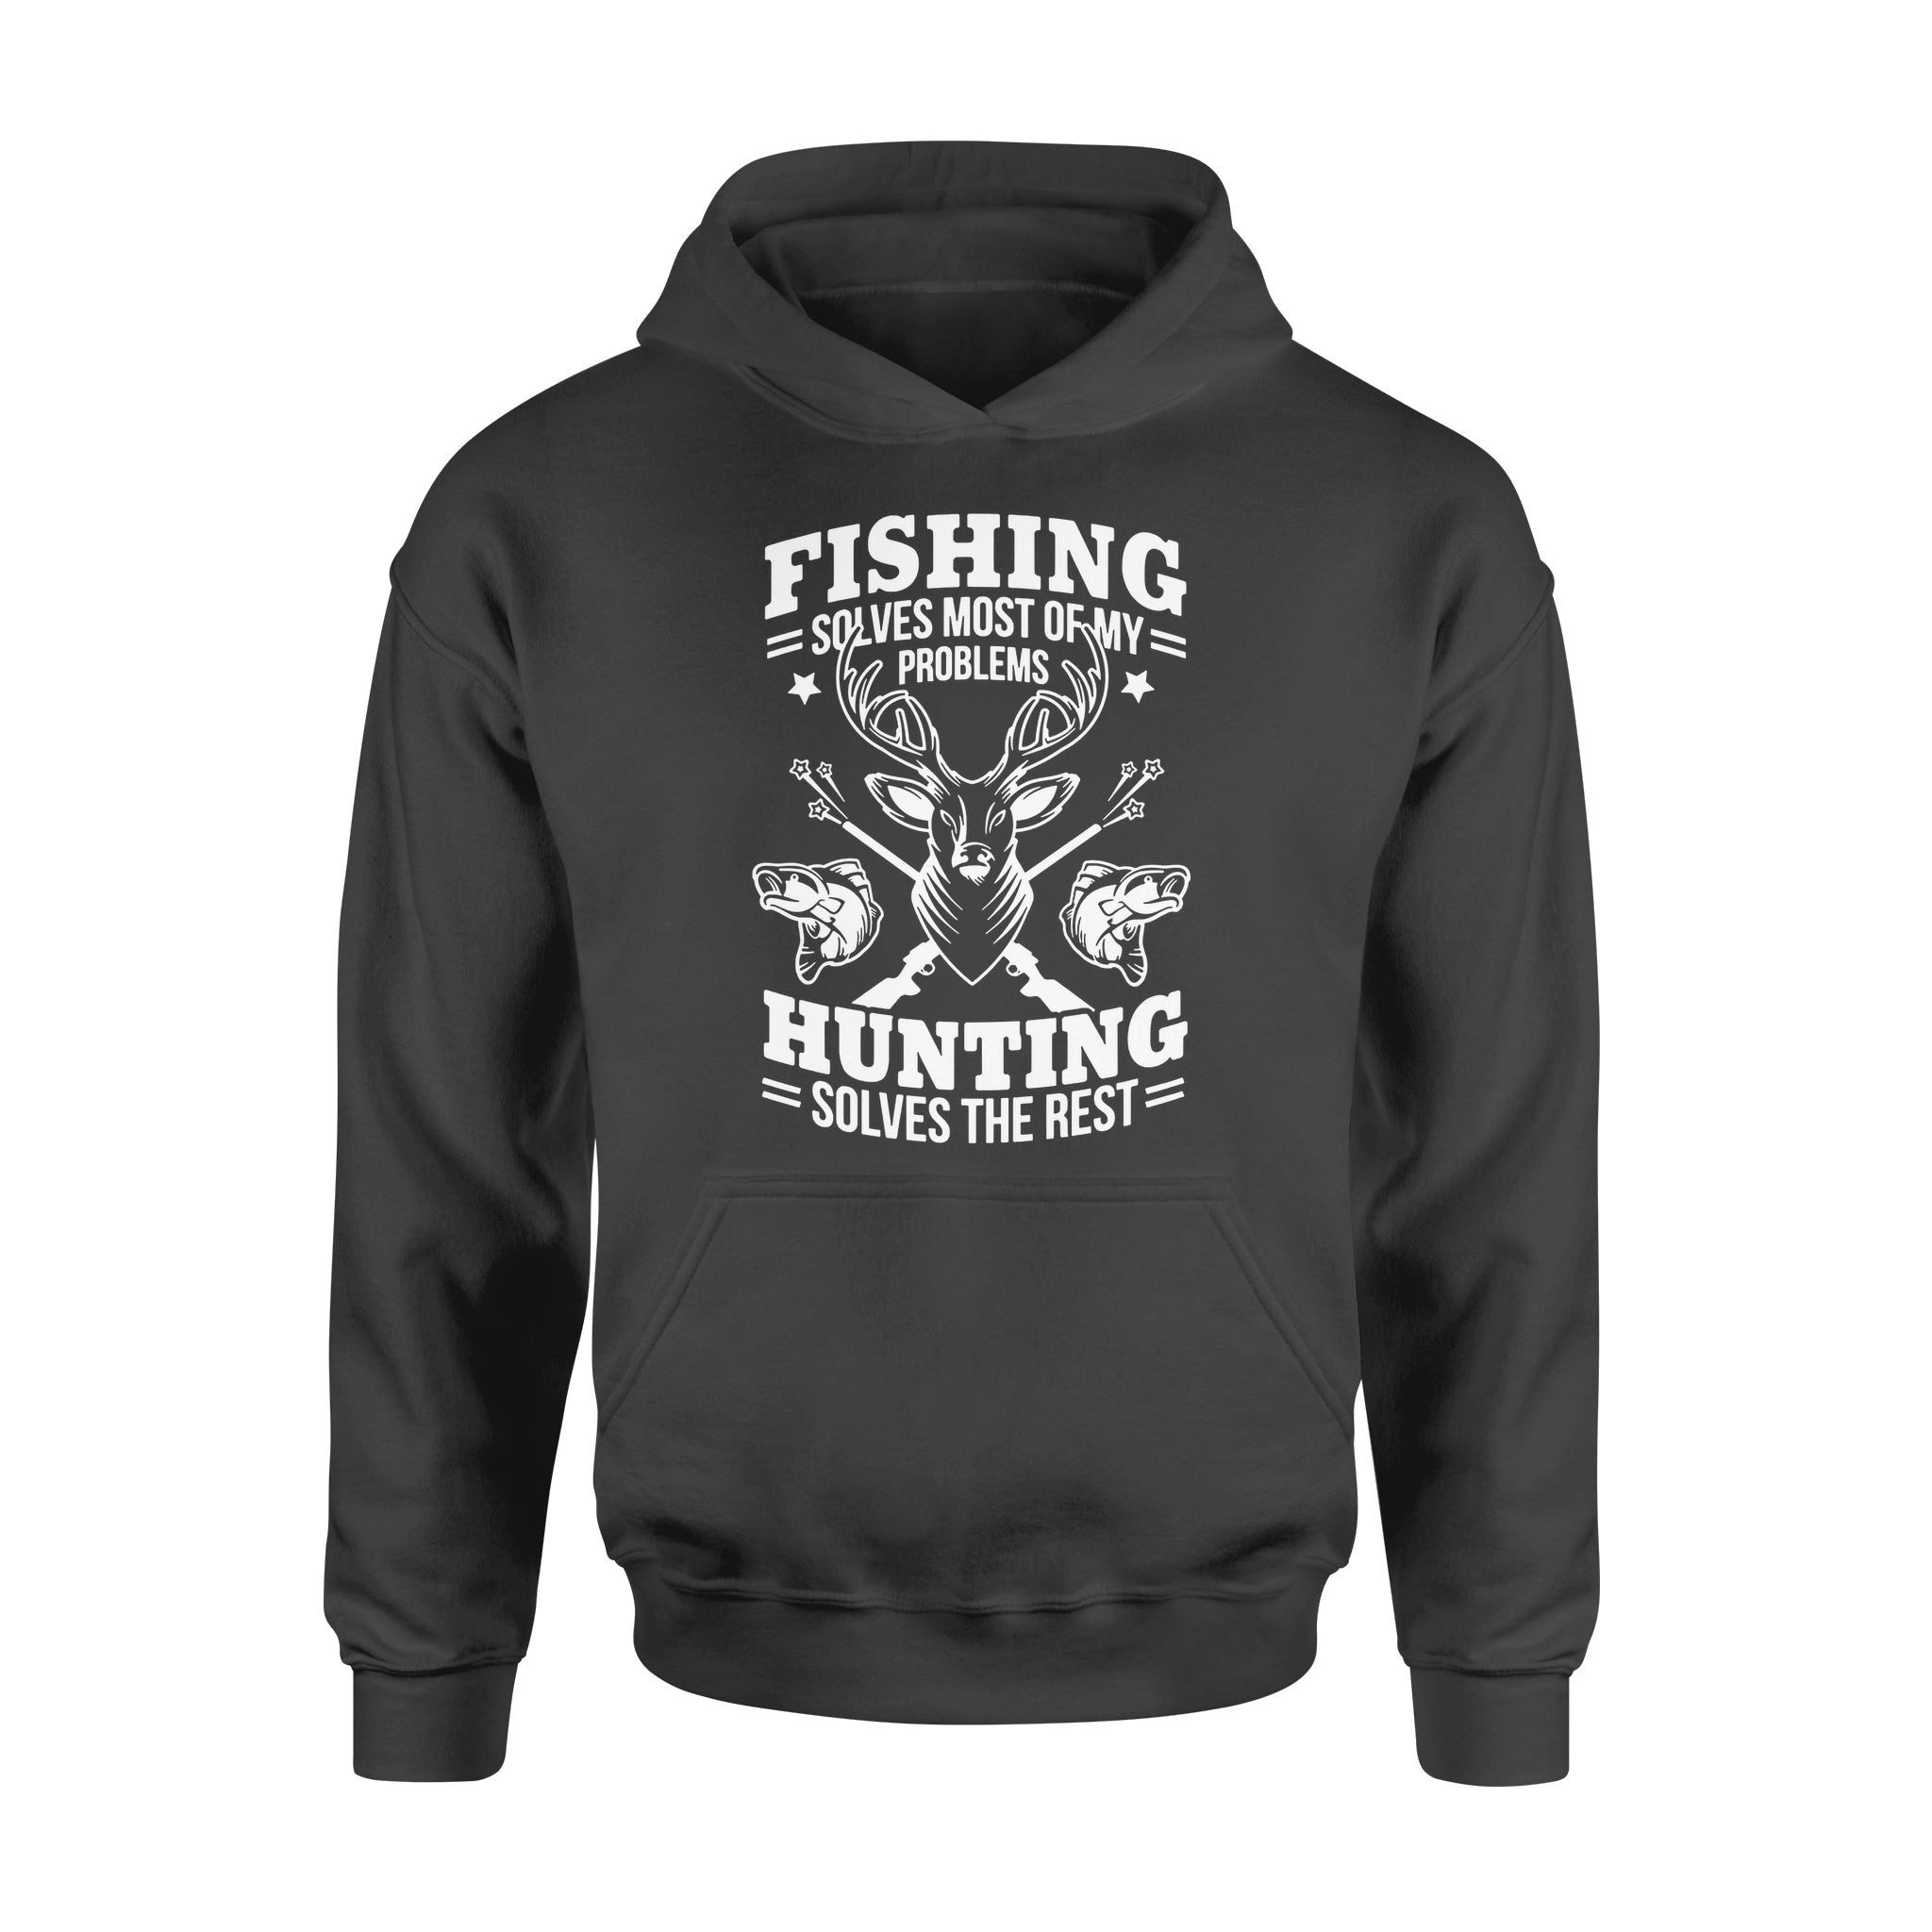 Fishing Solves Most Of My Problems Hunting Solves The Rest NQSD247 - Standard Hoodie